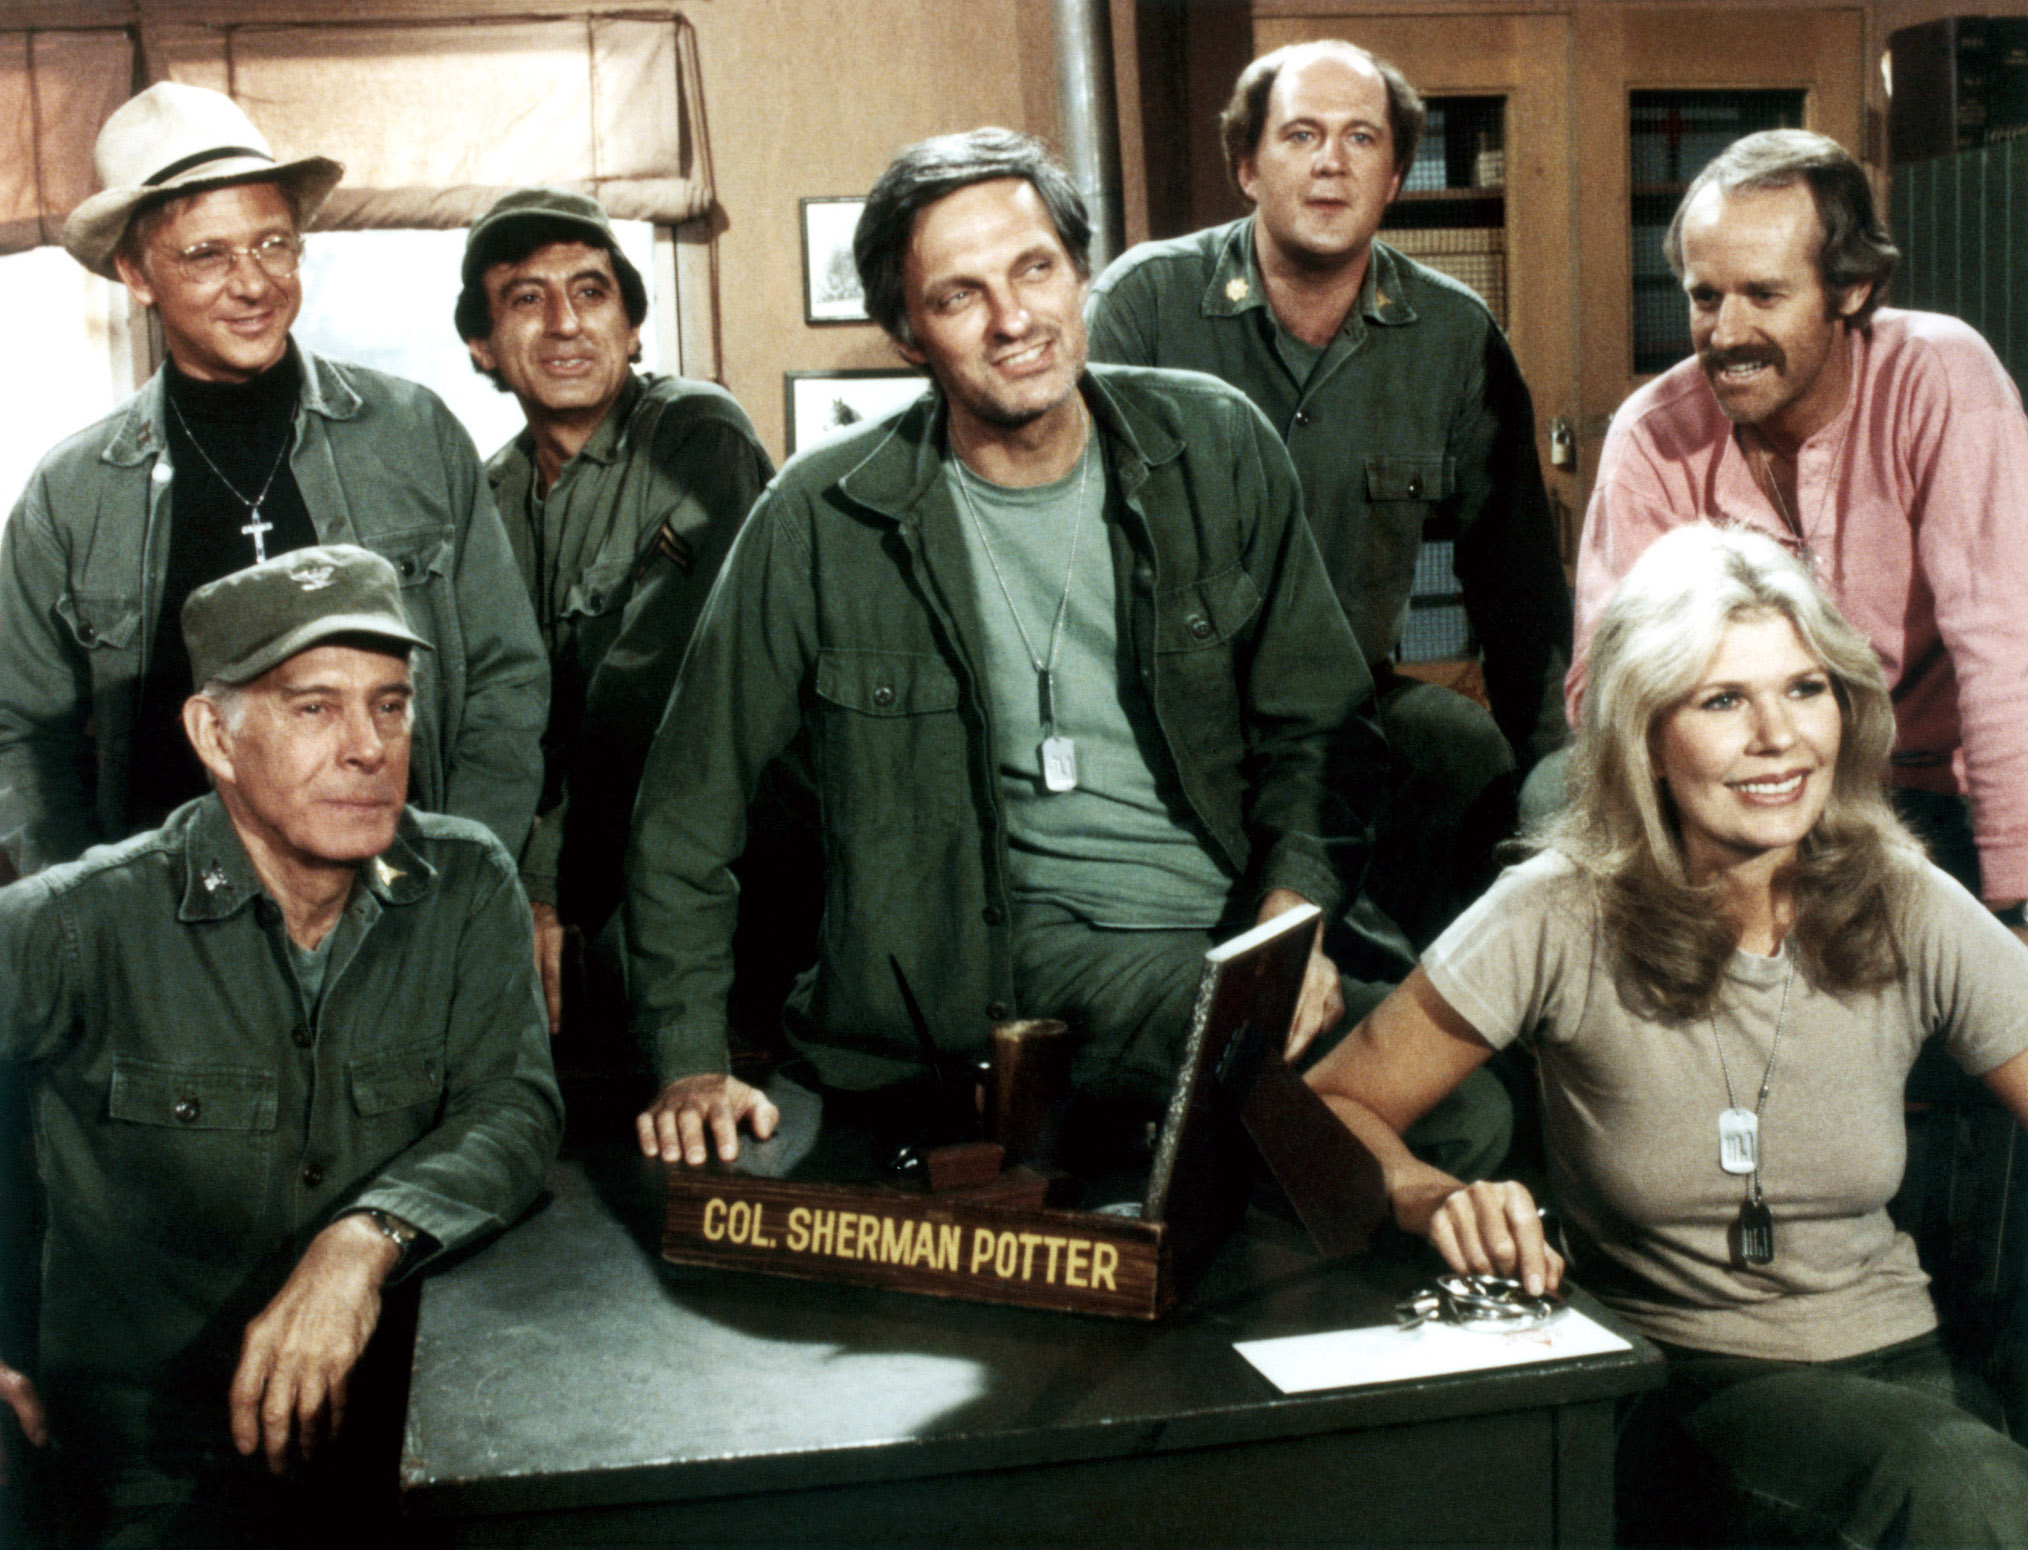 Alan Alda Reflects on the 50th Anniversary of M*A*S*H